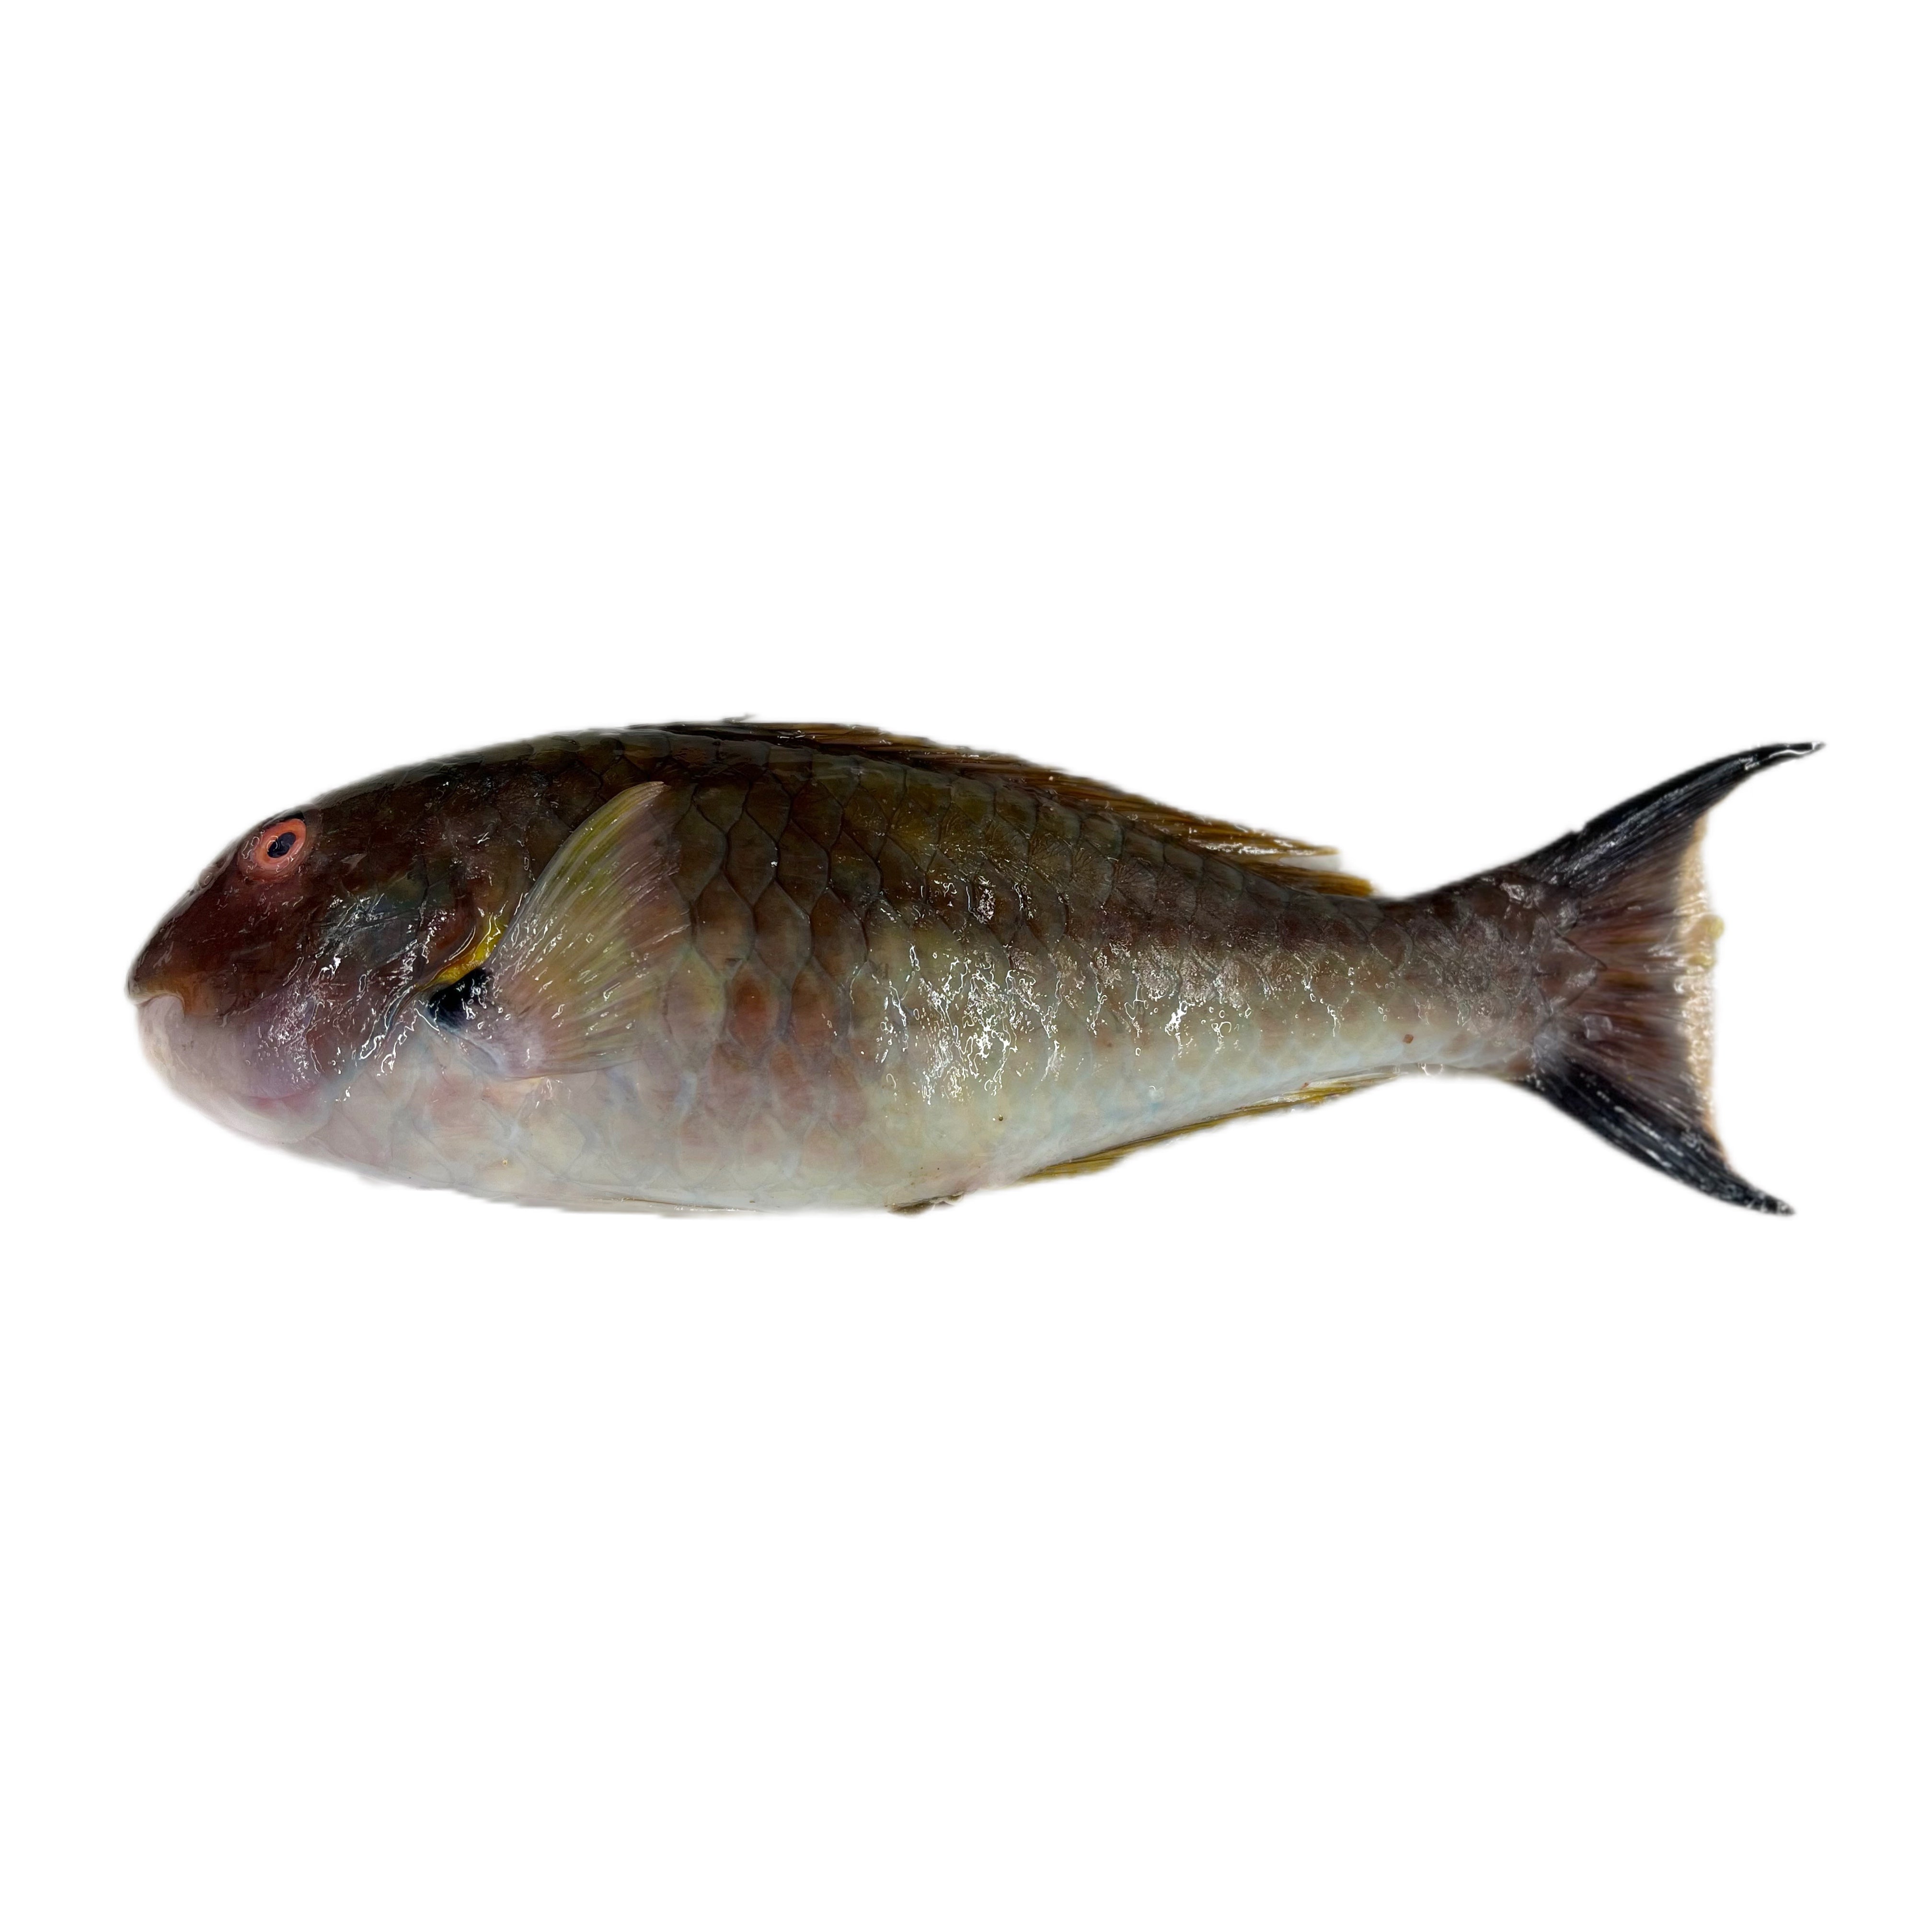 One Parrot Fish 1-2Lb WGGS